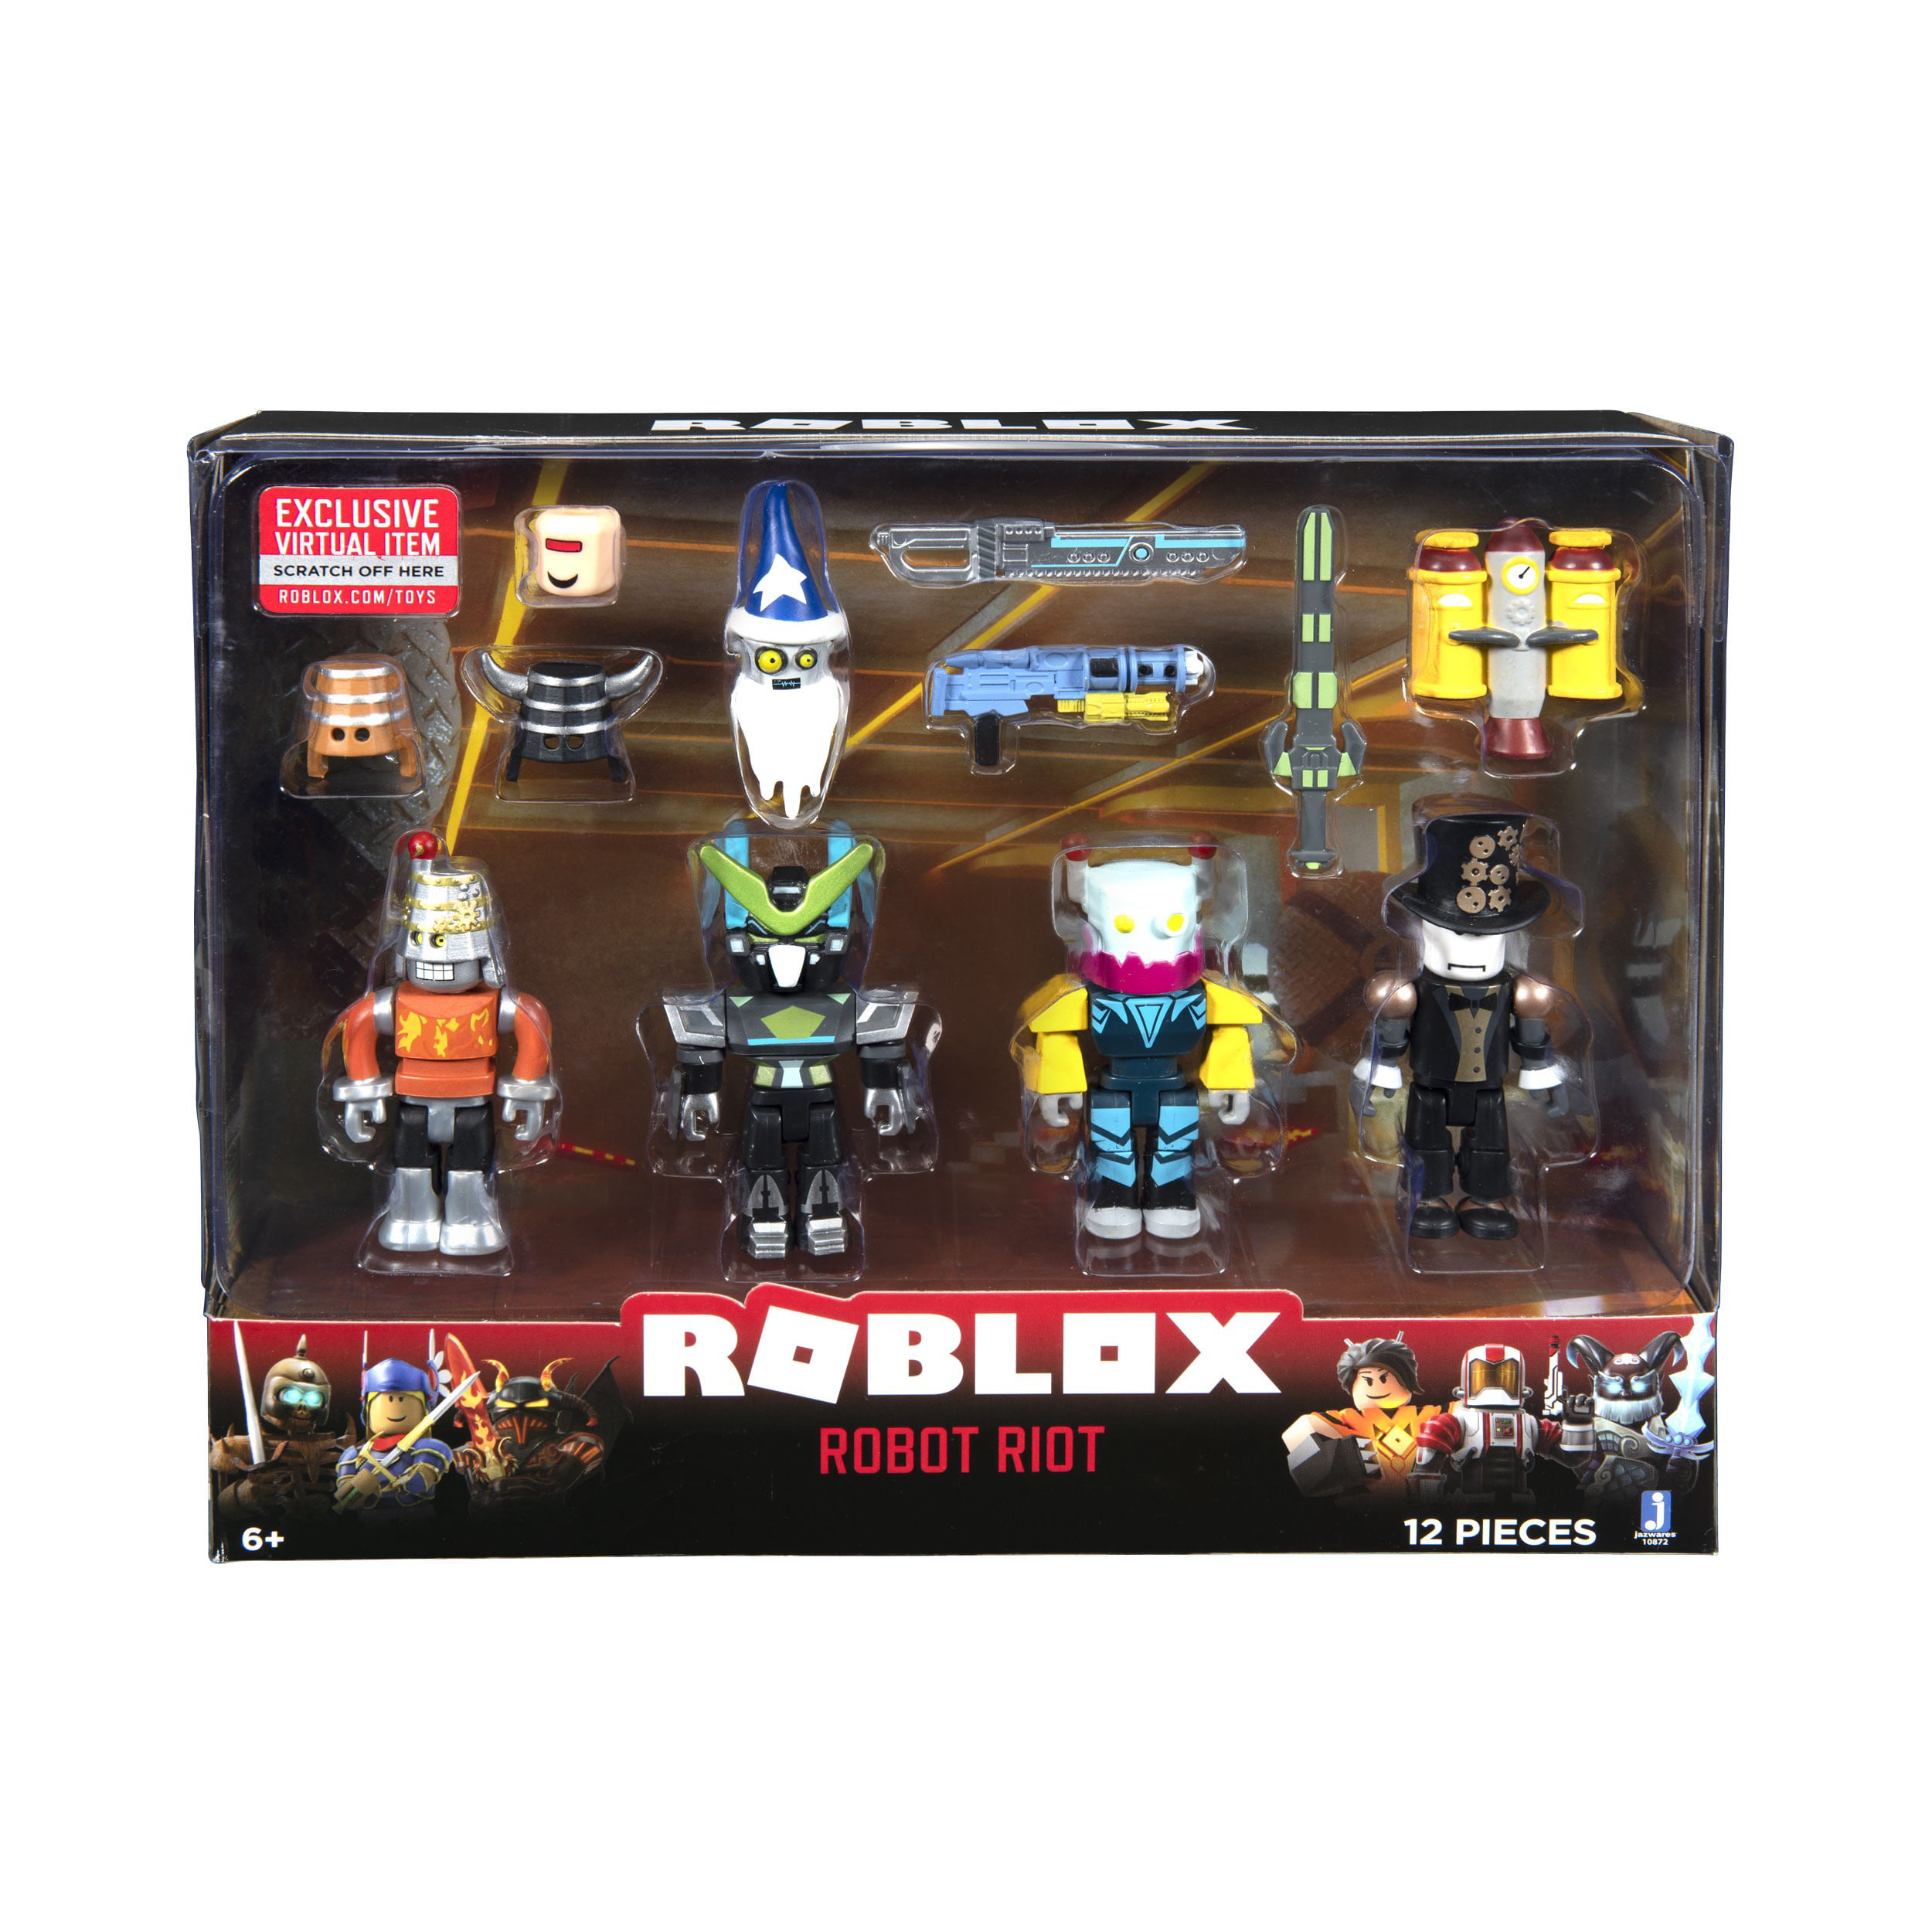 Roblox Action Collection Robot Riot Four Figure Pack Includes Exclusive Virtual Item Walmart Com Walmart Com - how to make roblox costume robot